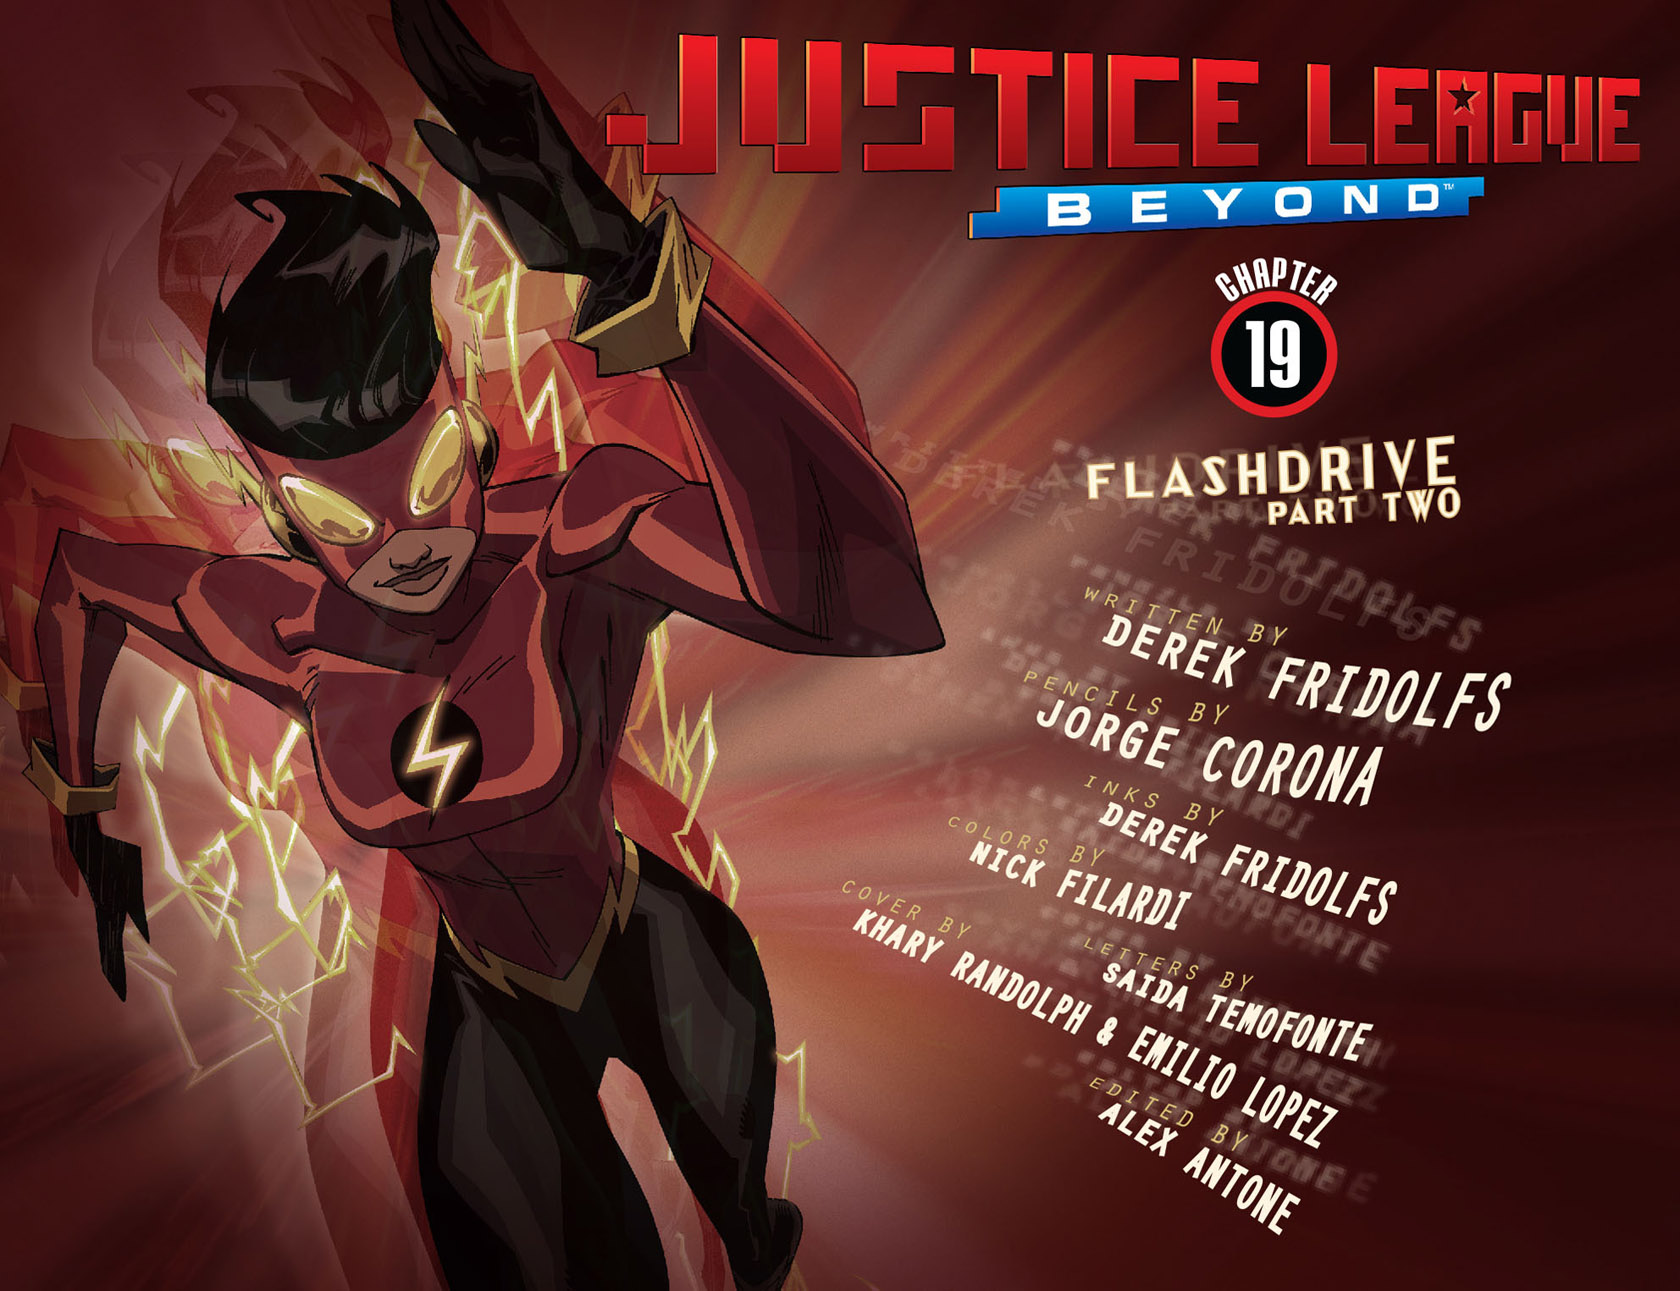 Read online Justice League Beyond comic -  Issue #19 - 2